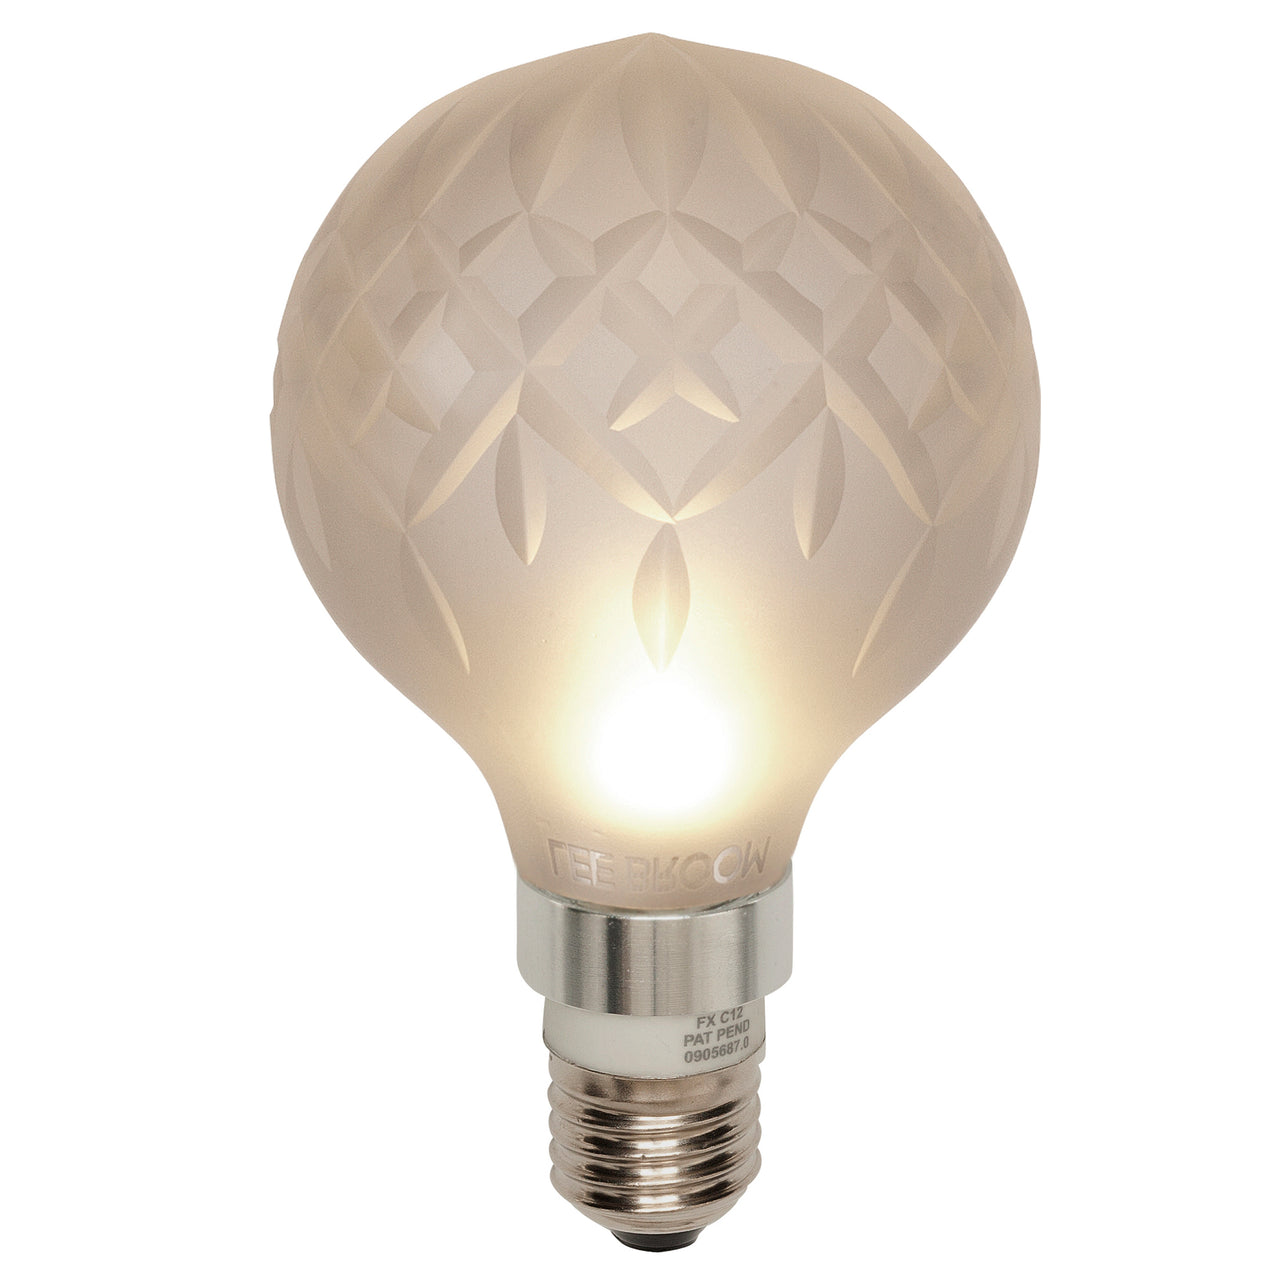 Crystal Bulb + Pendant: Bulb + Frosted